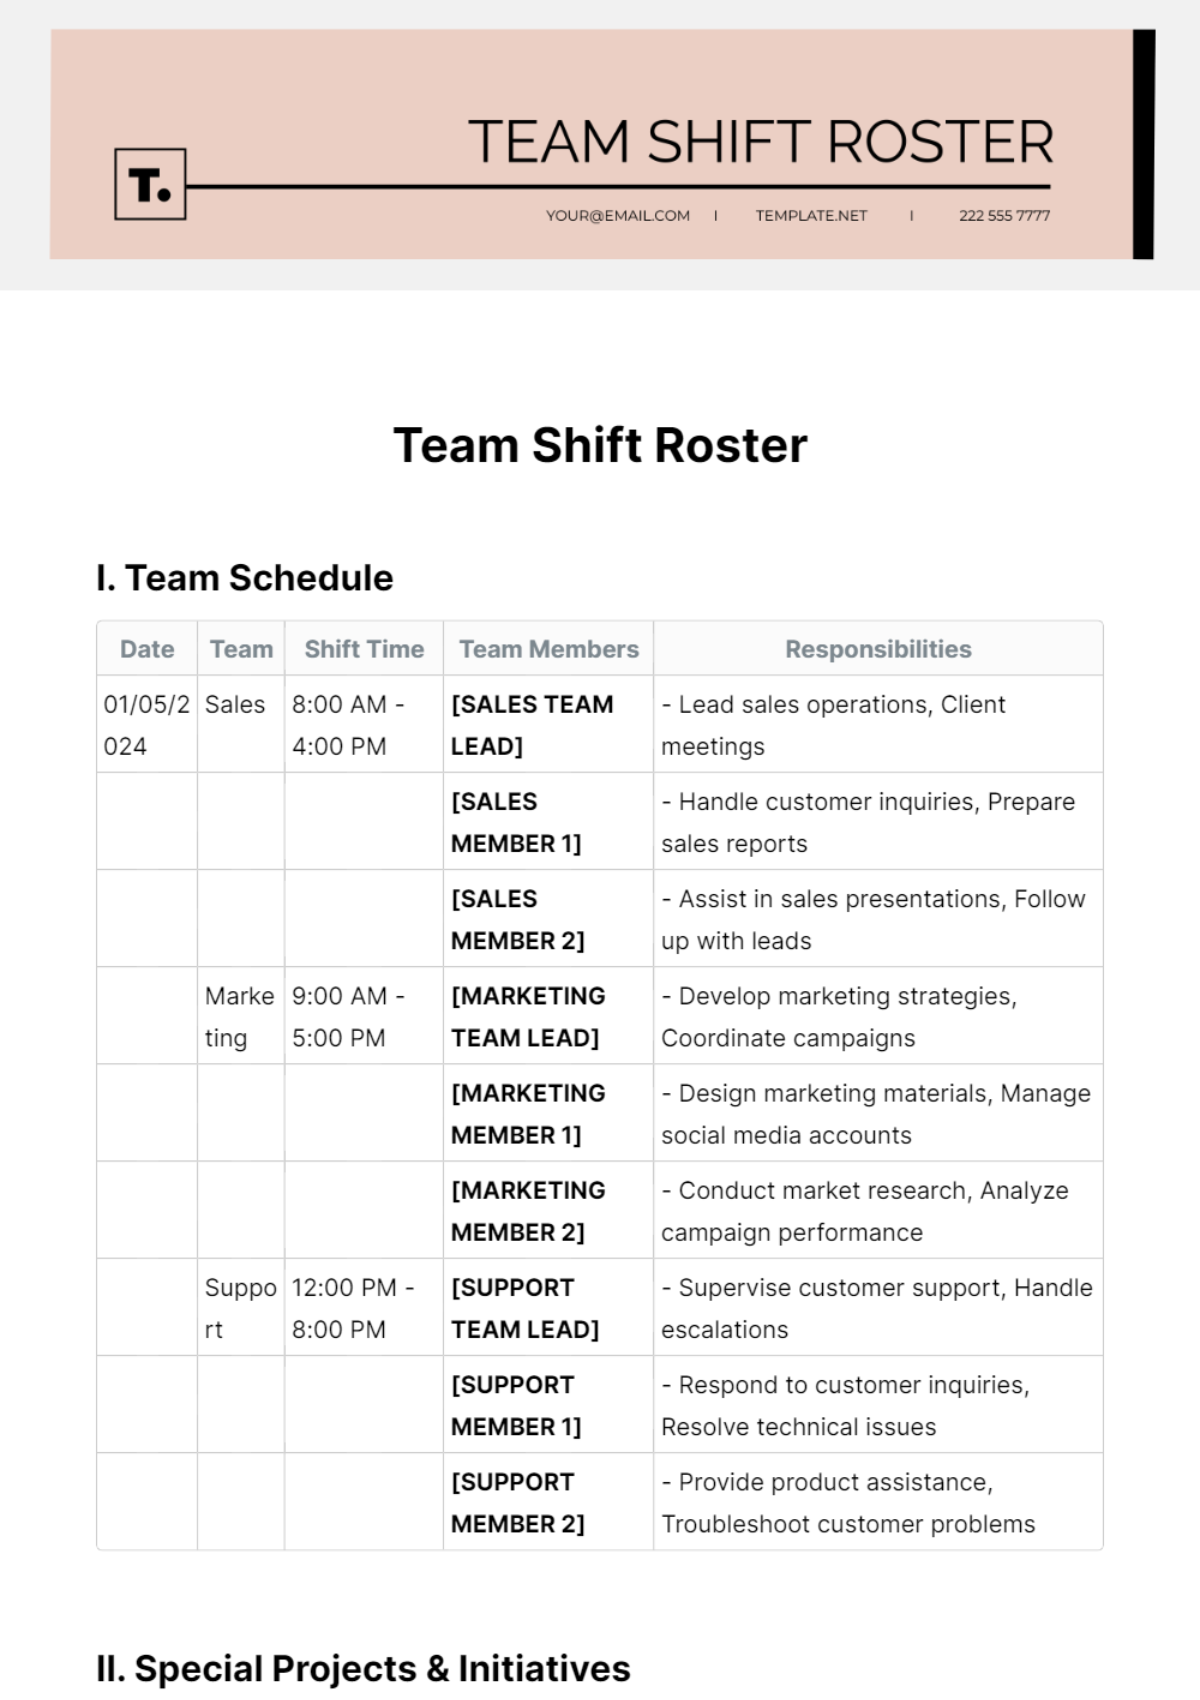 Team Shift Roster Template